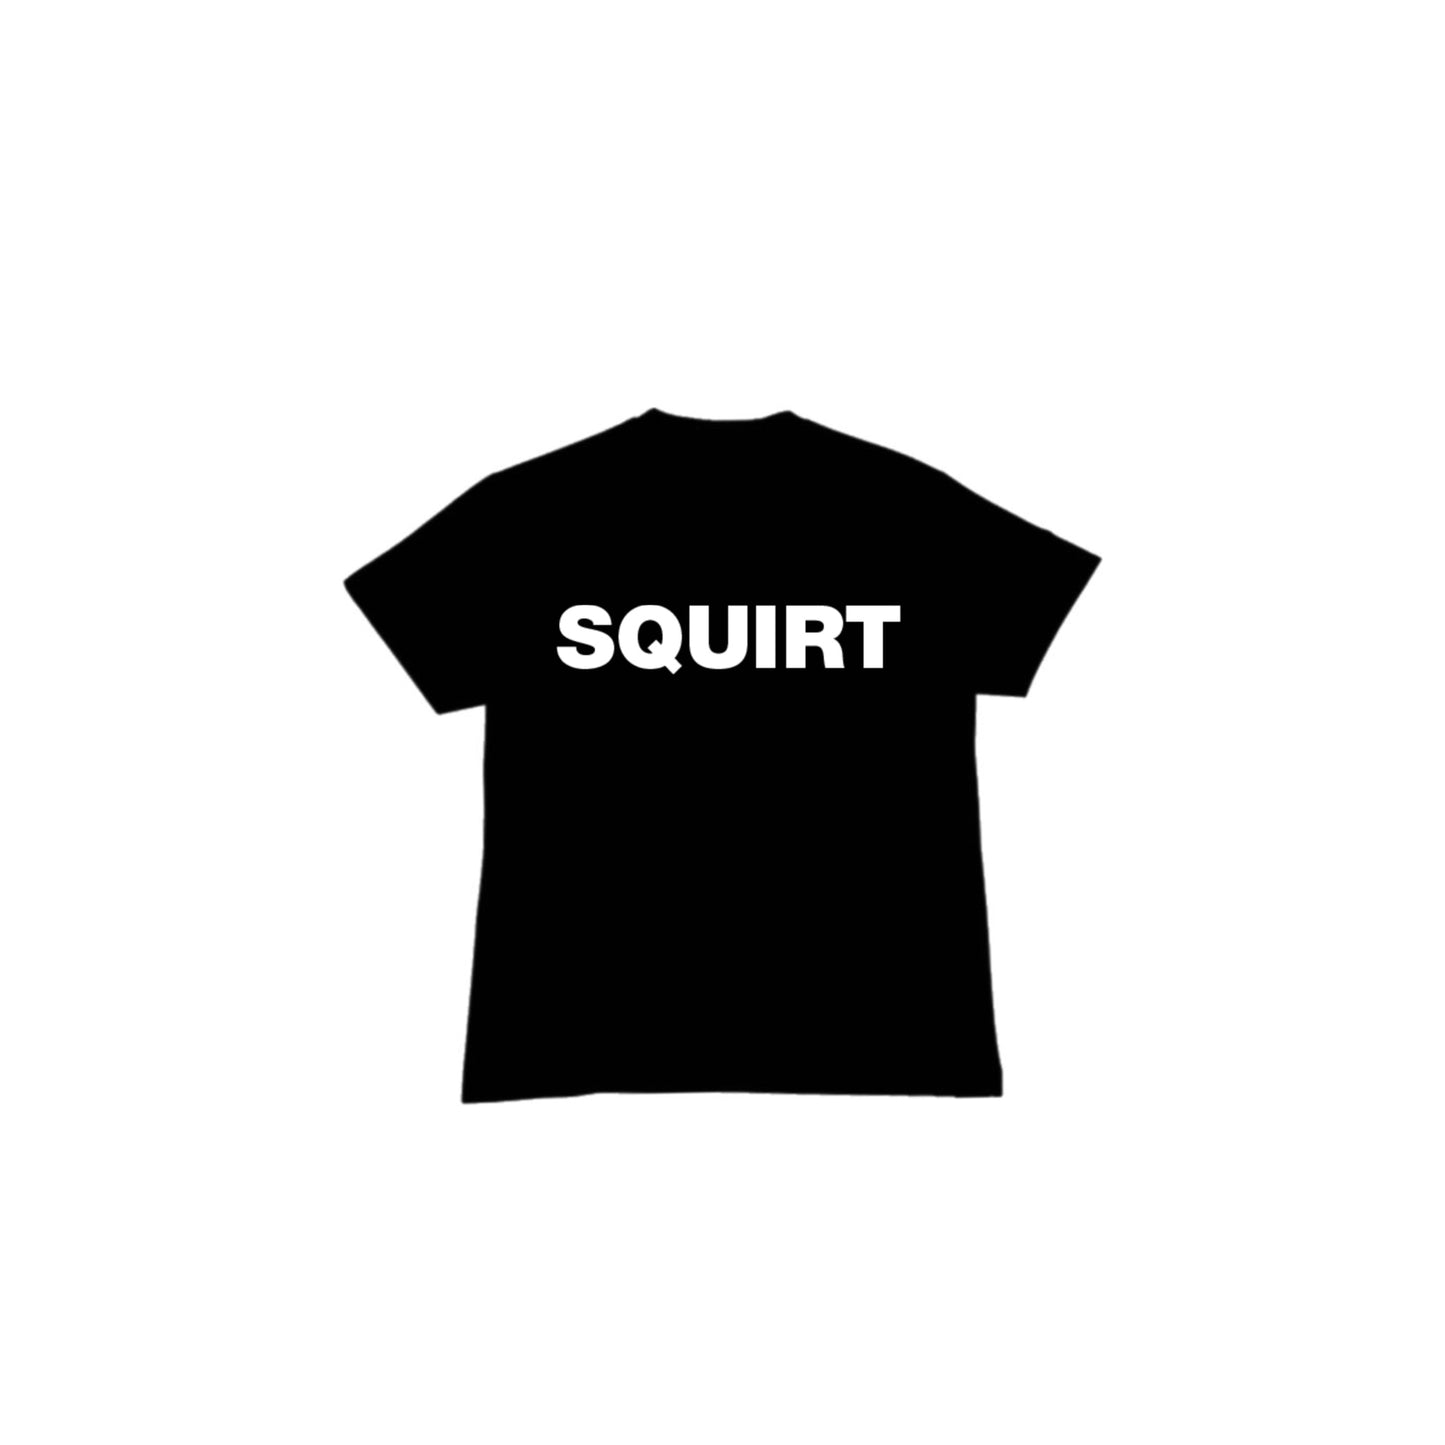 Squirt ?